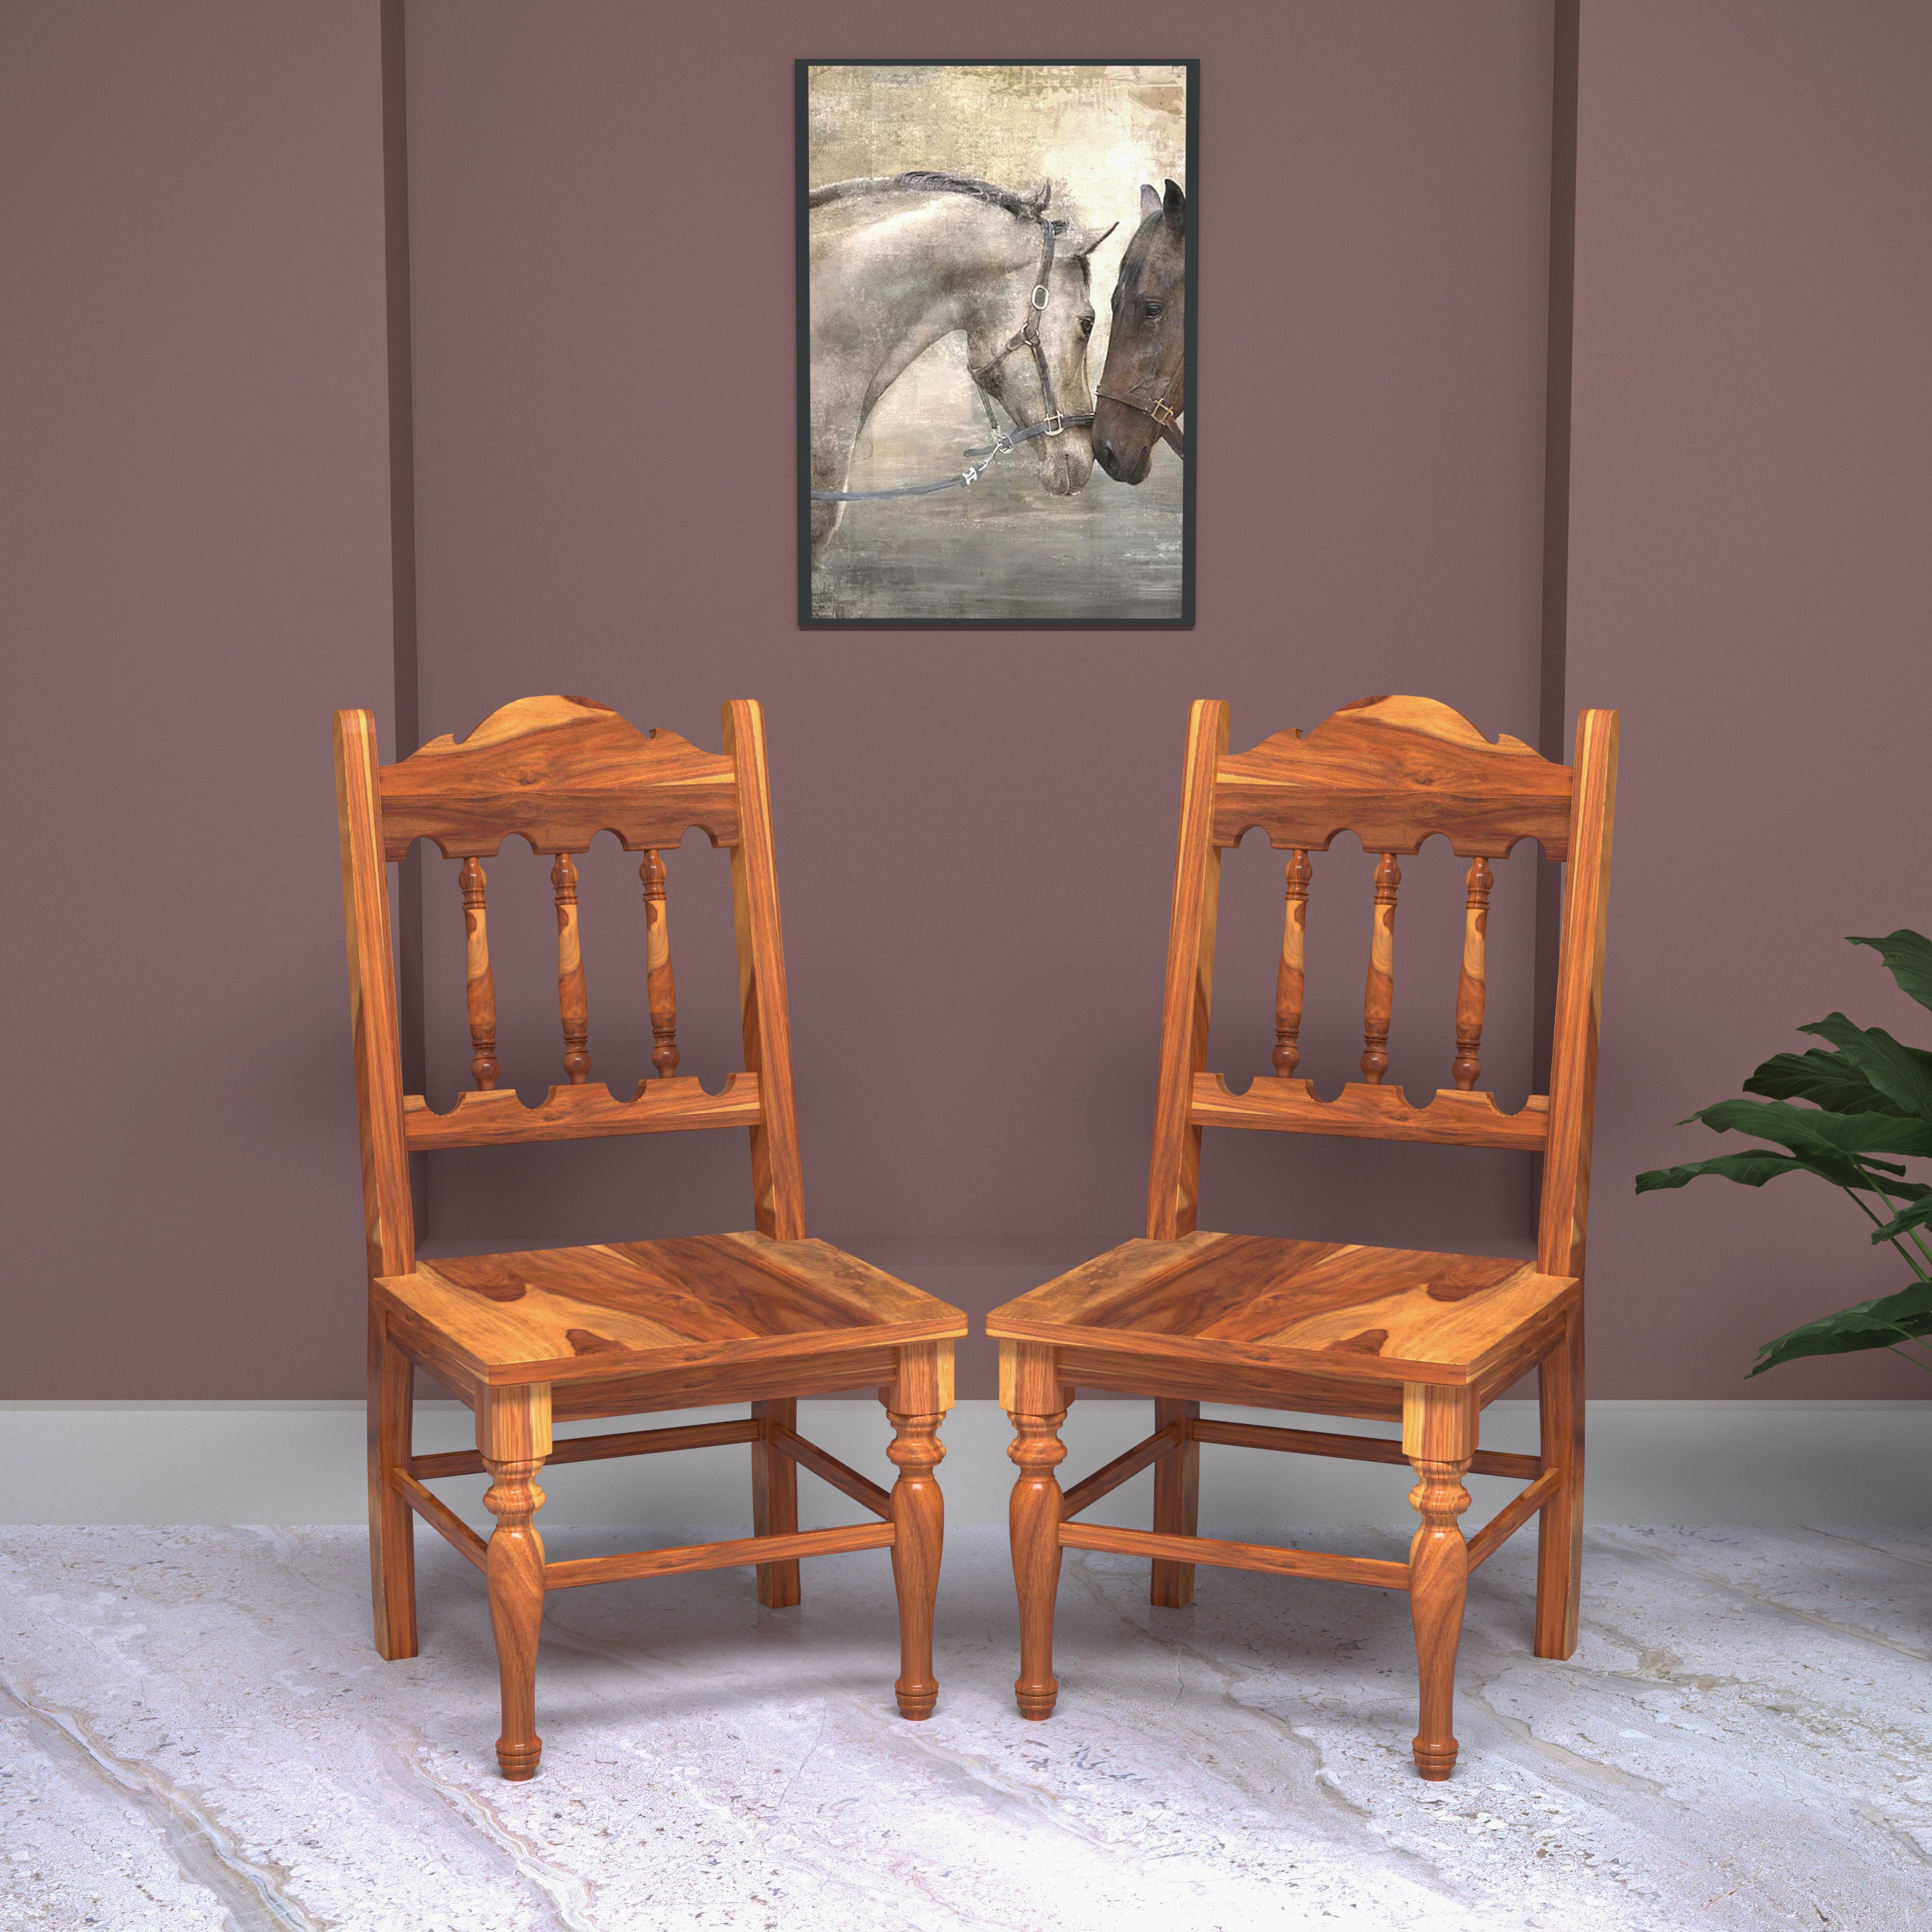 Montage Heritage Style Wooden Handmade Chair Set for Home Dining Chair